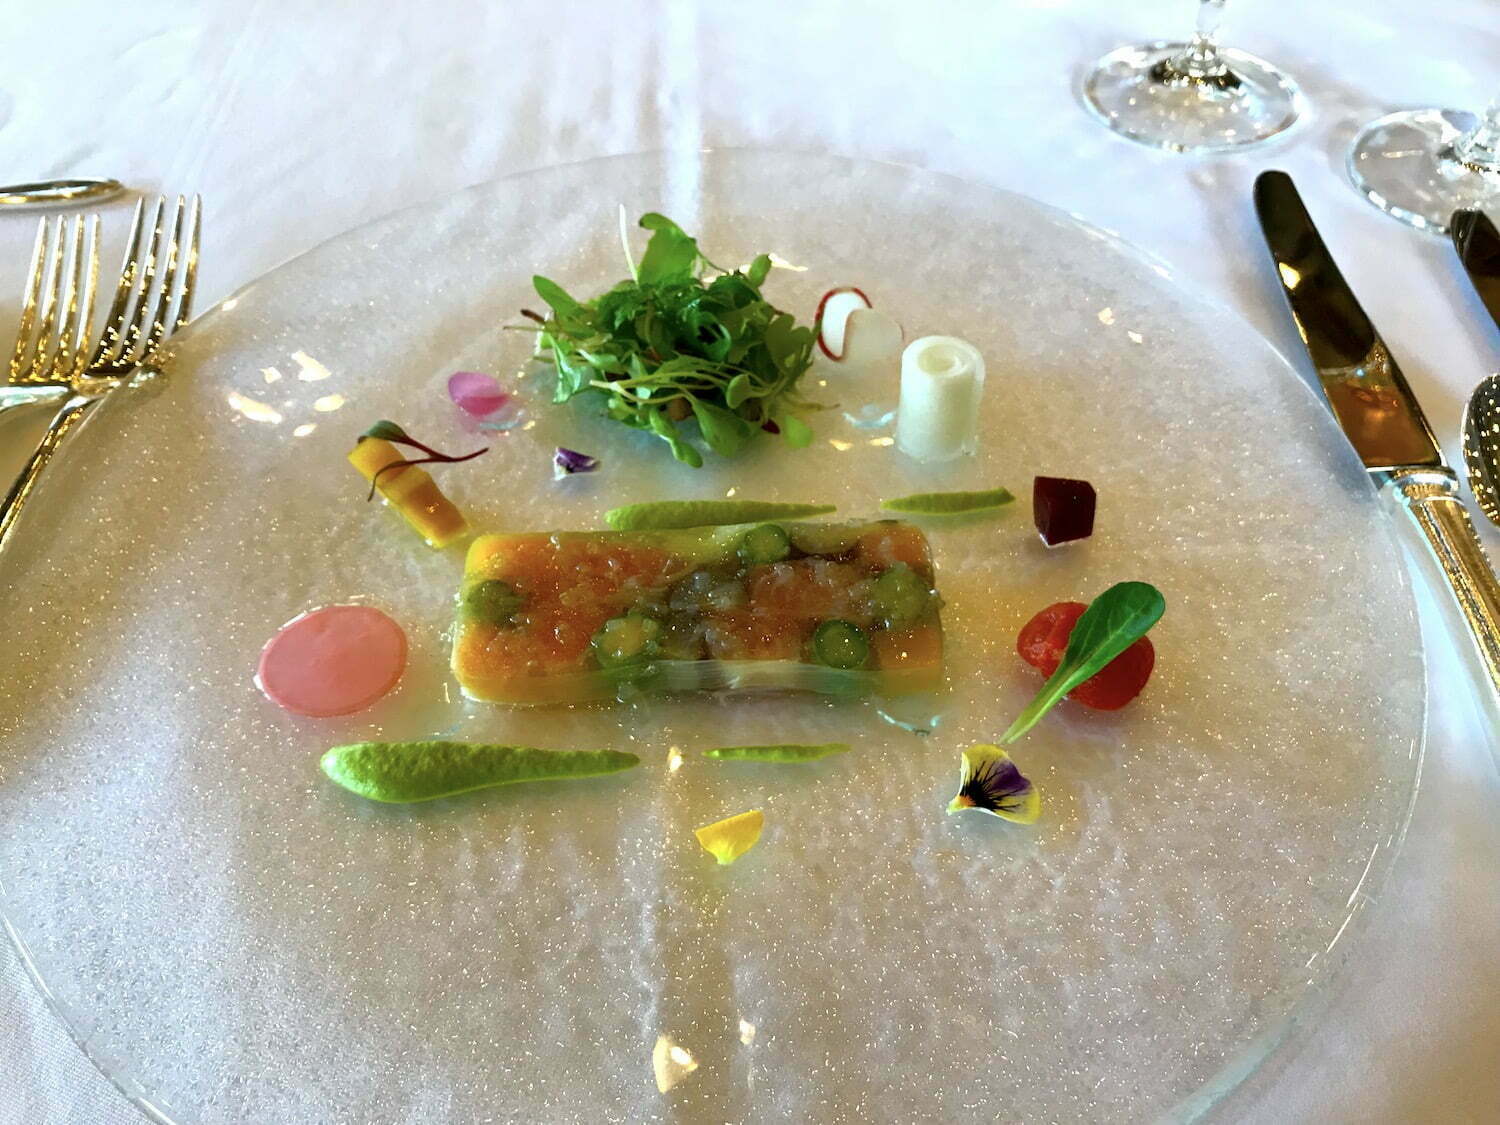 The spring lunch course